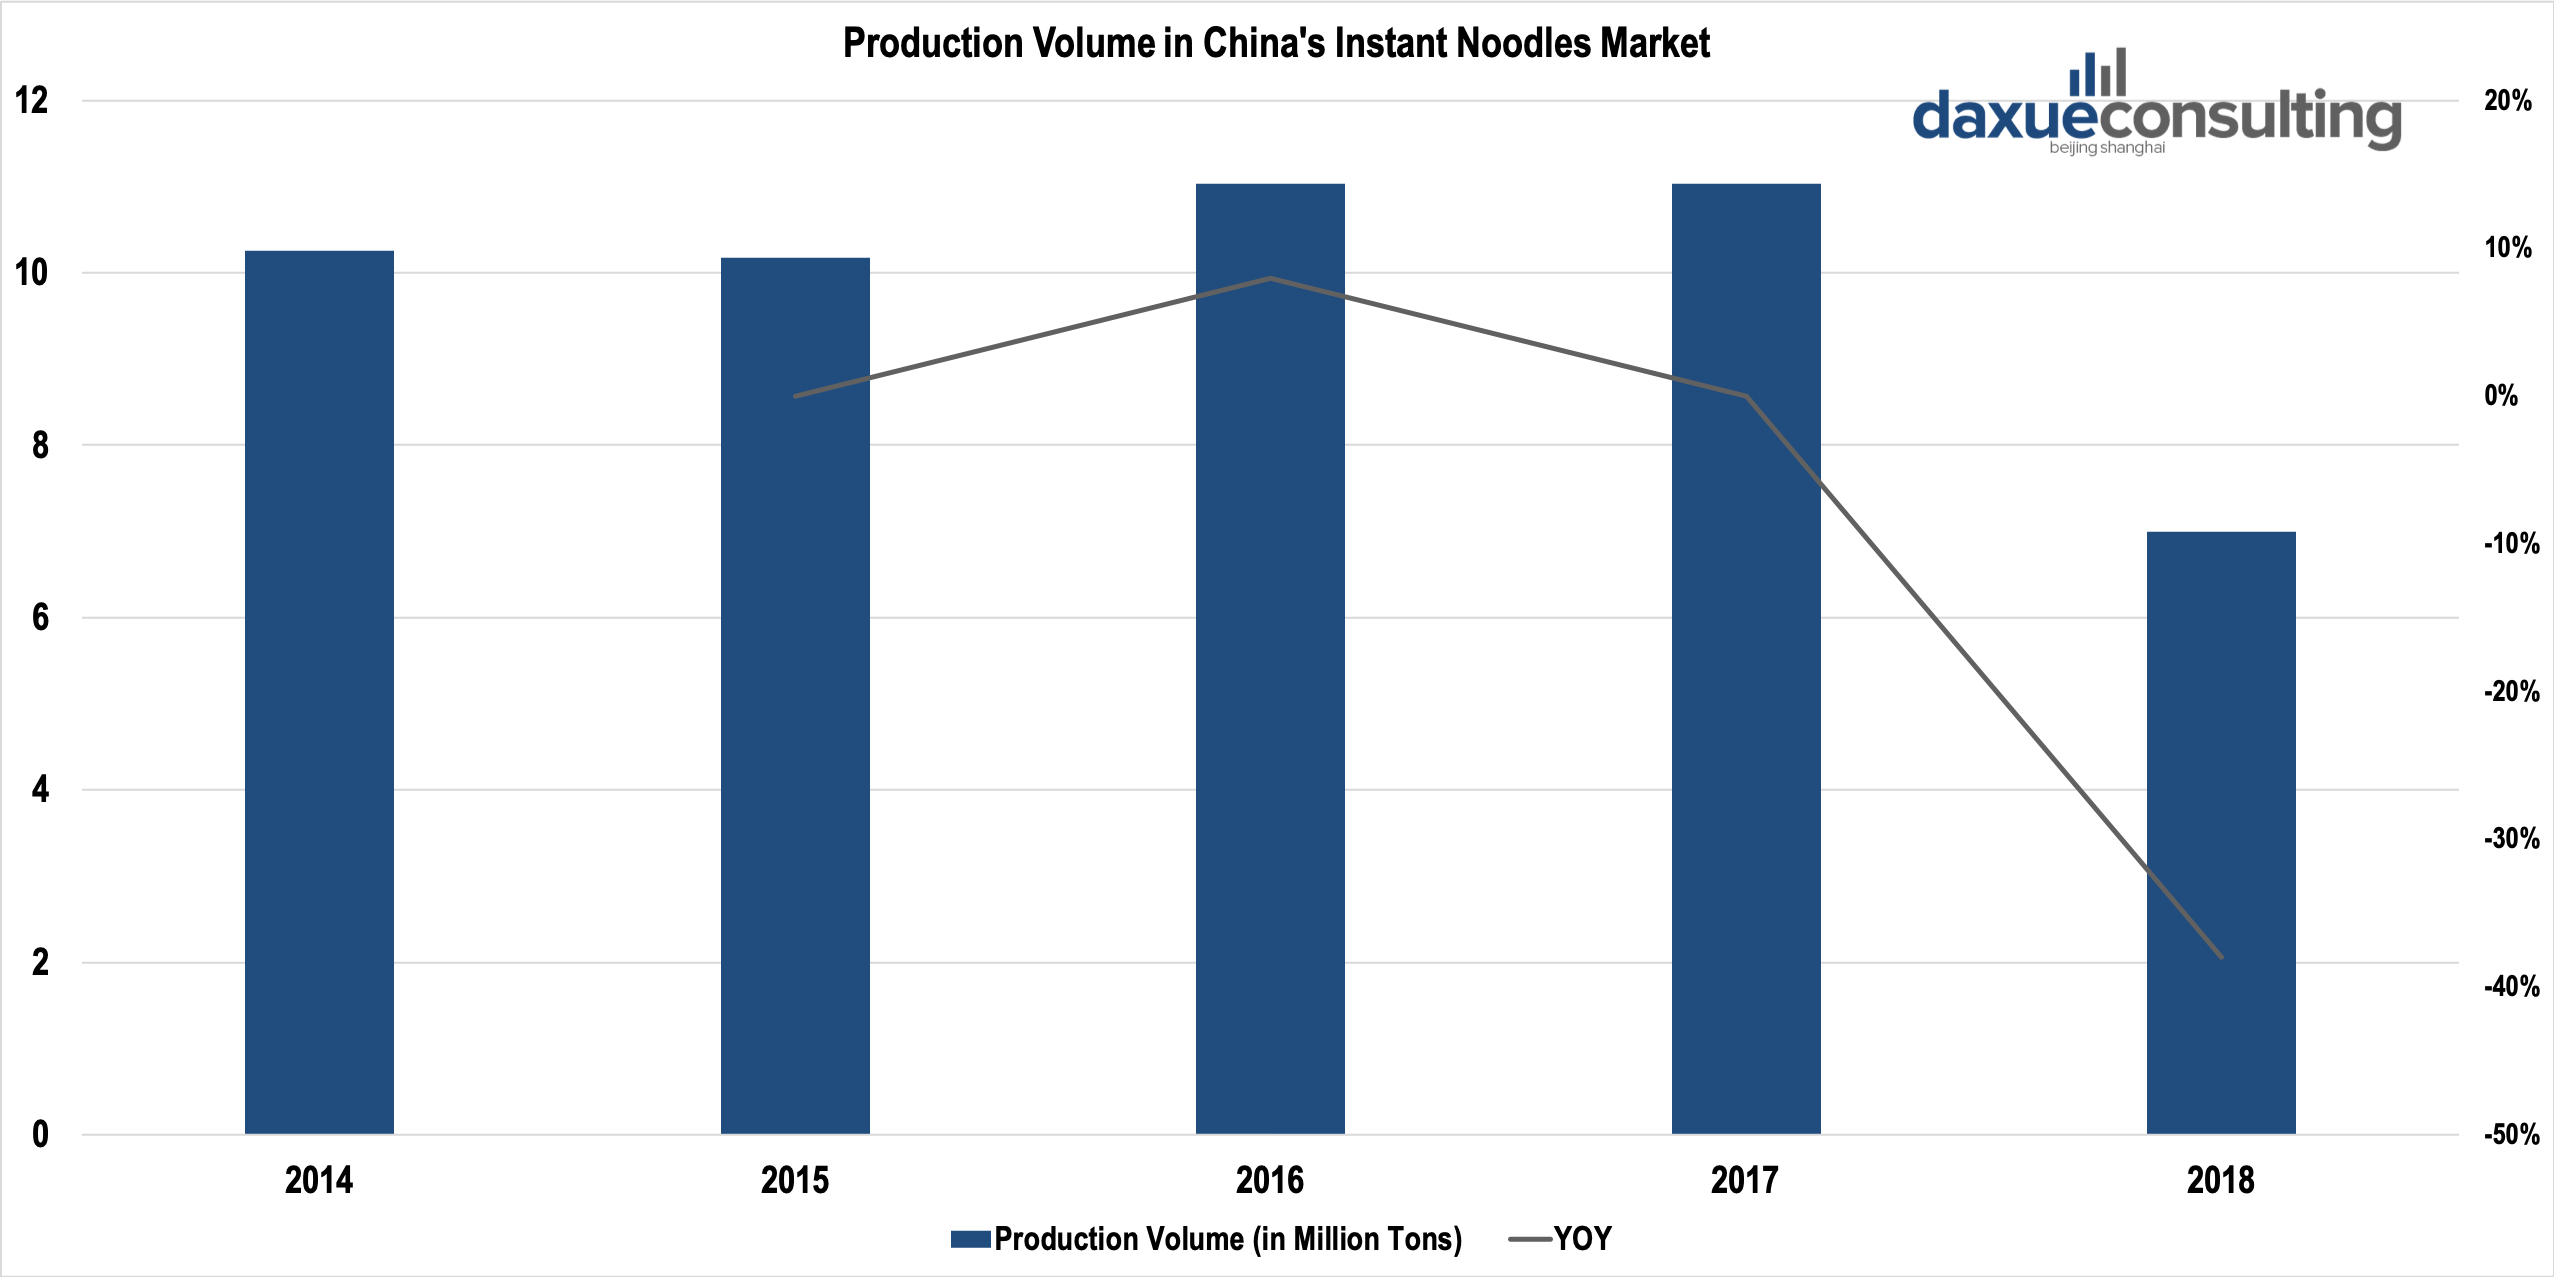 Production Volume in China's Instant Noodles Market